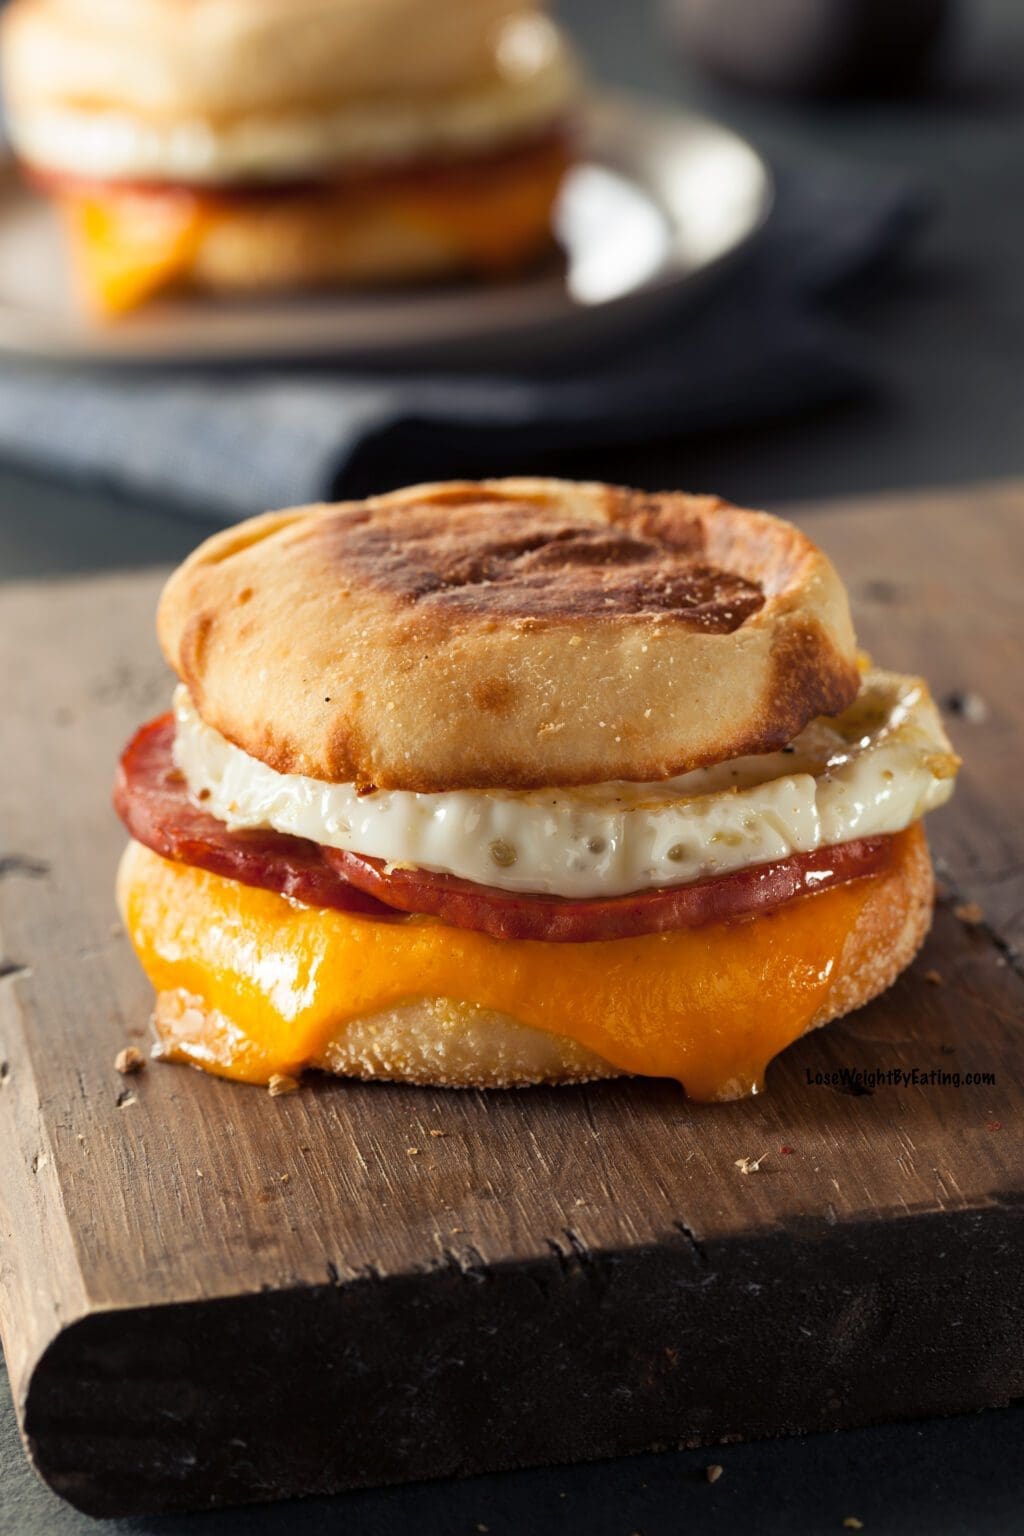 Low Calorie Breakfast Sandwiches - Lose Weight By Eating